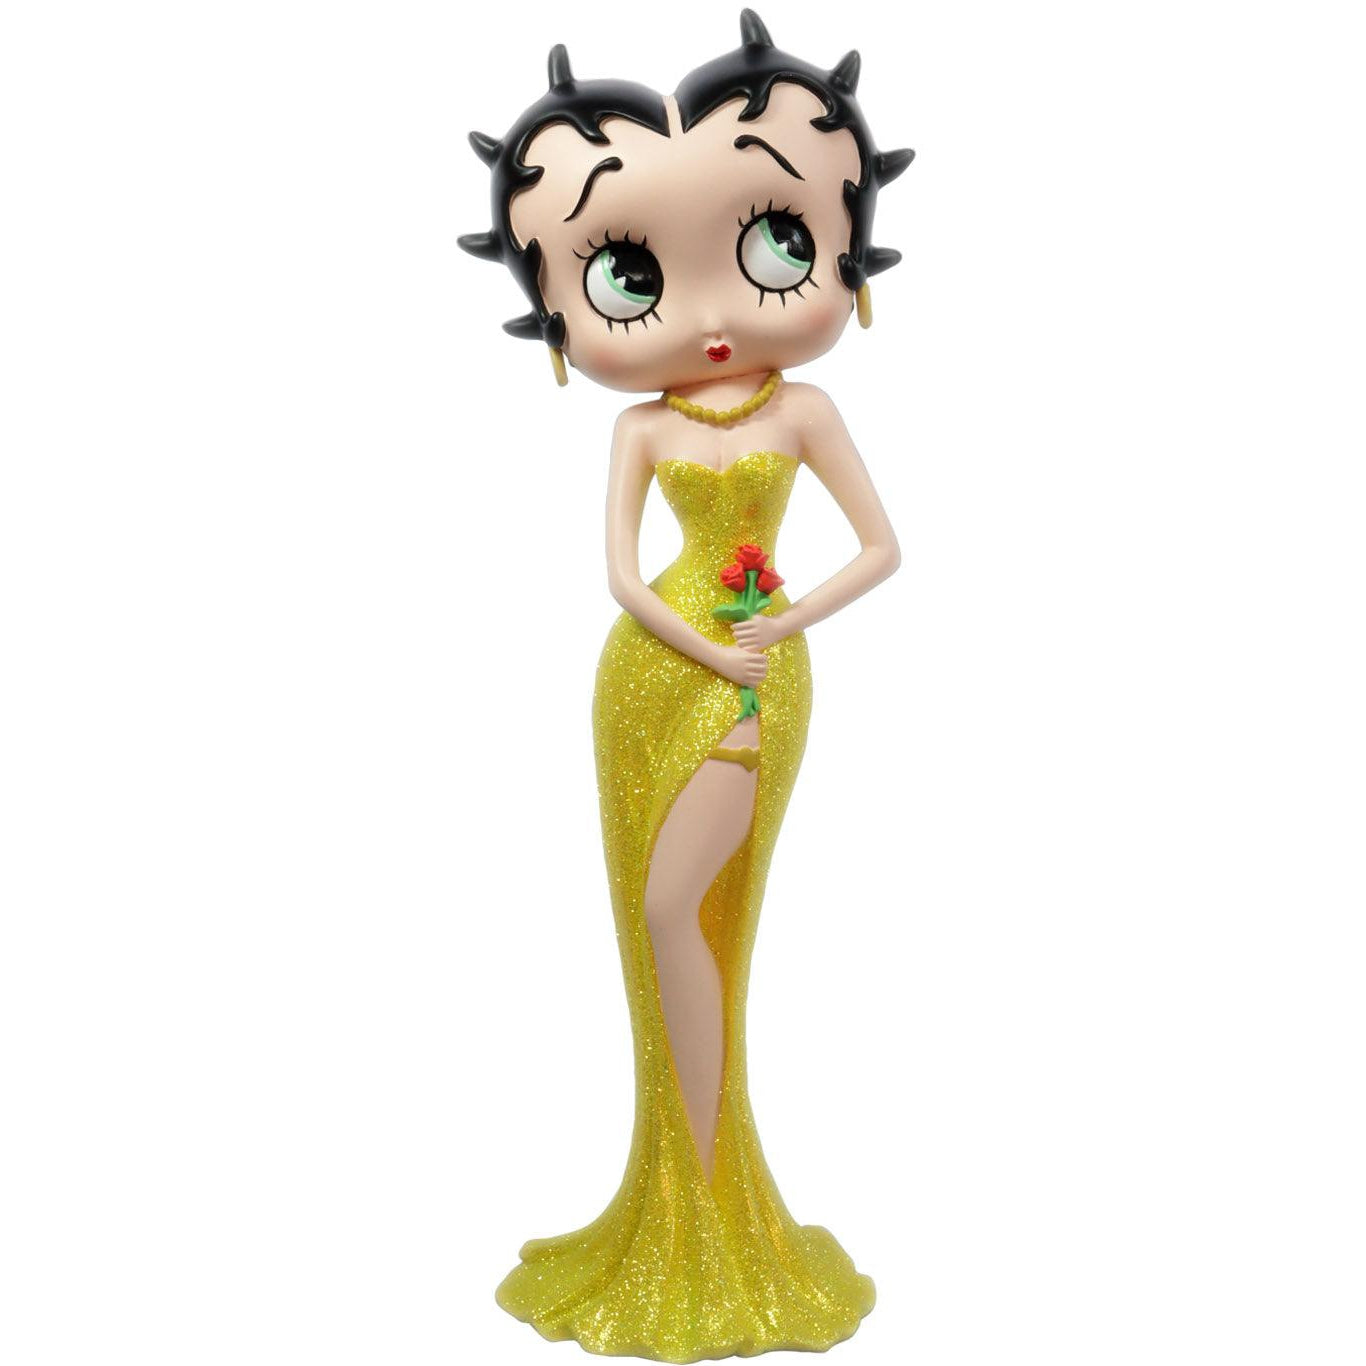 Betty Boop Holding Flowers Yellow Glitter Dress (Betty Boop) - Gallery Gifts Online 